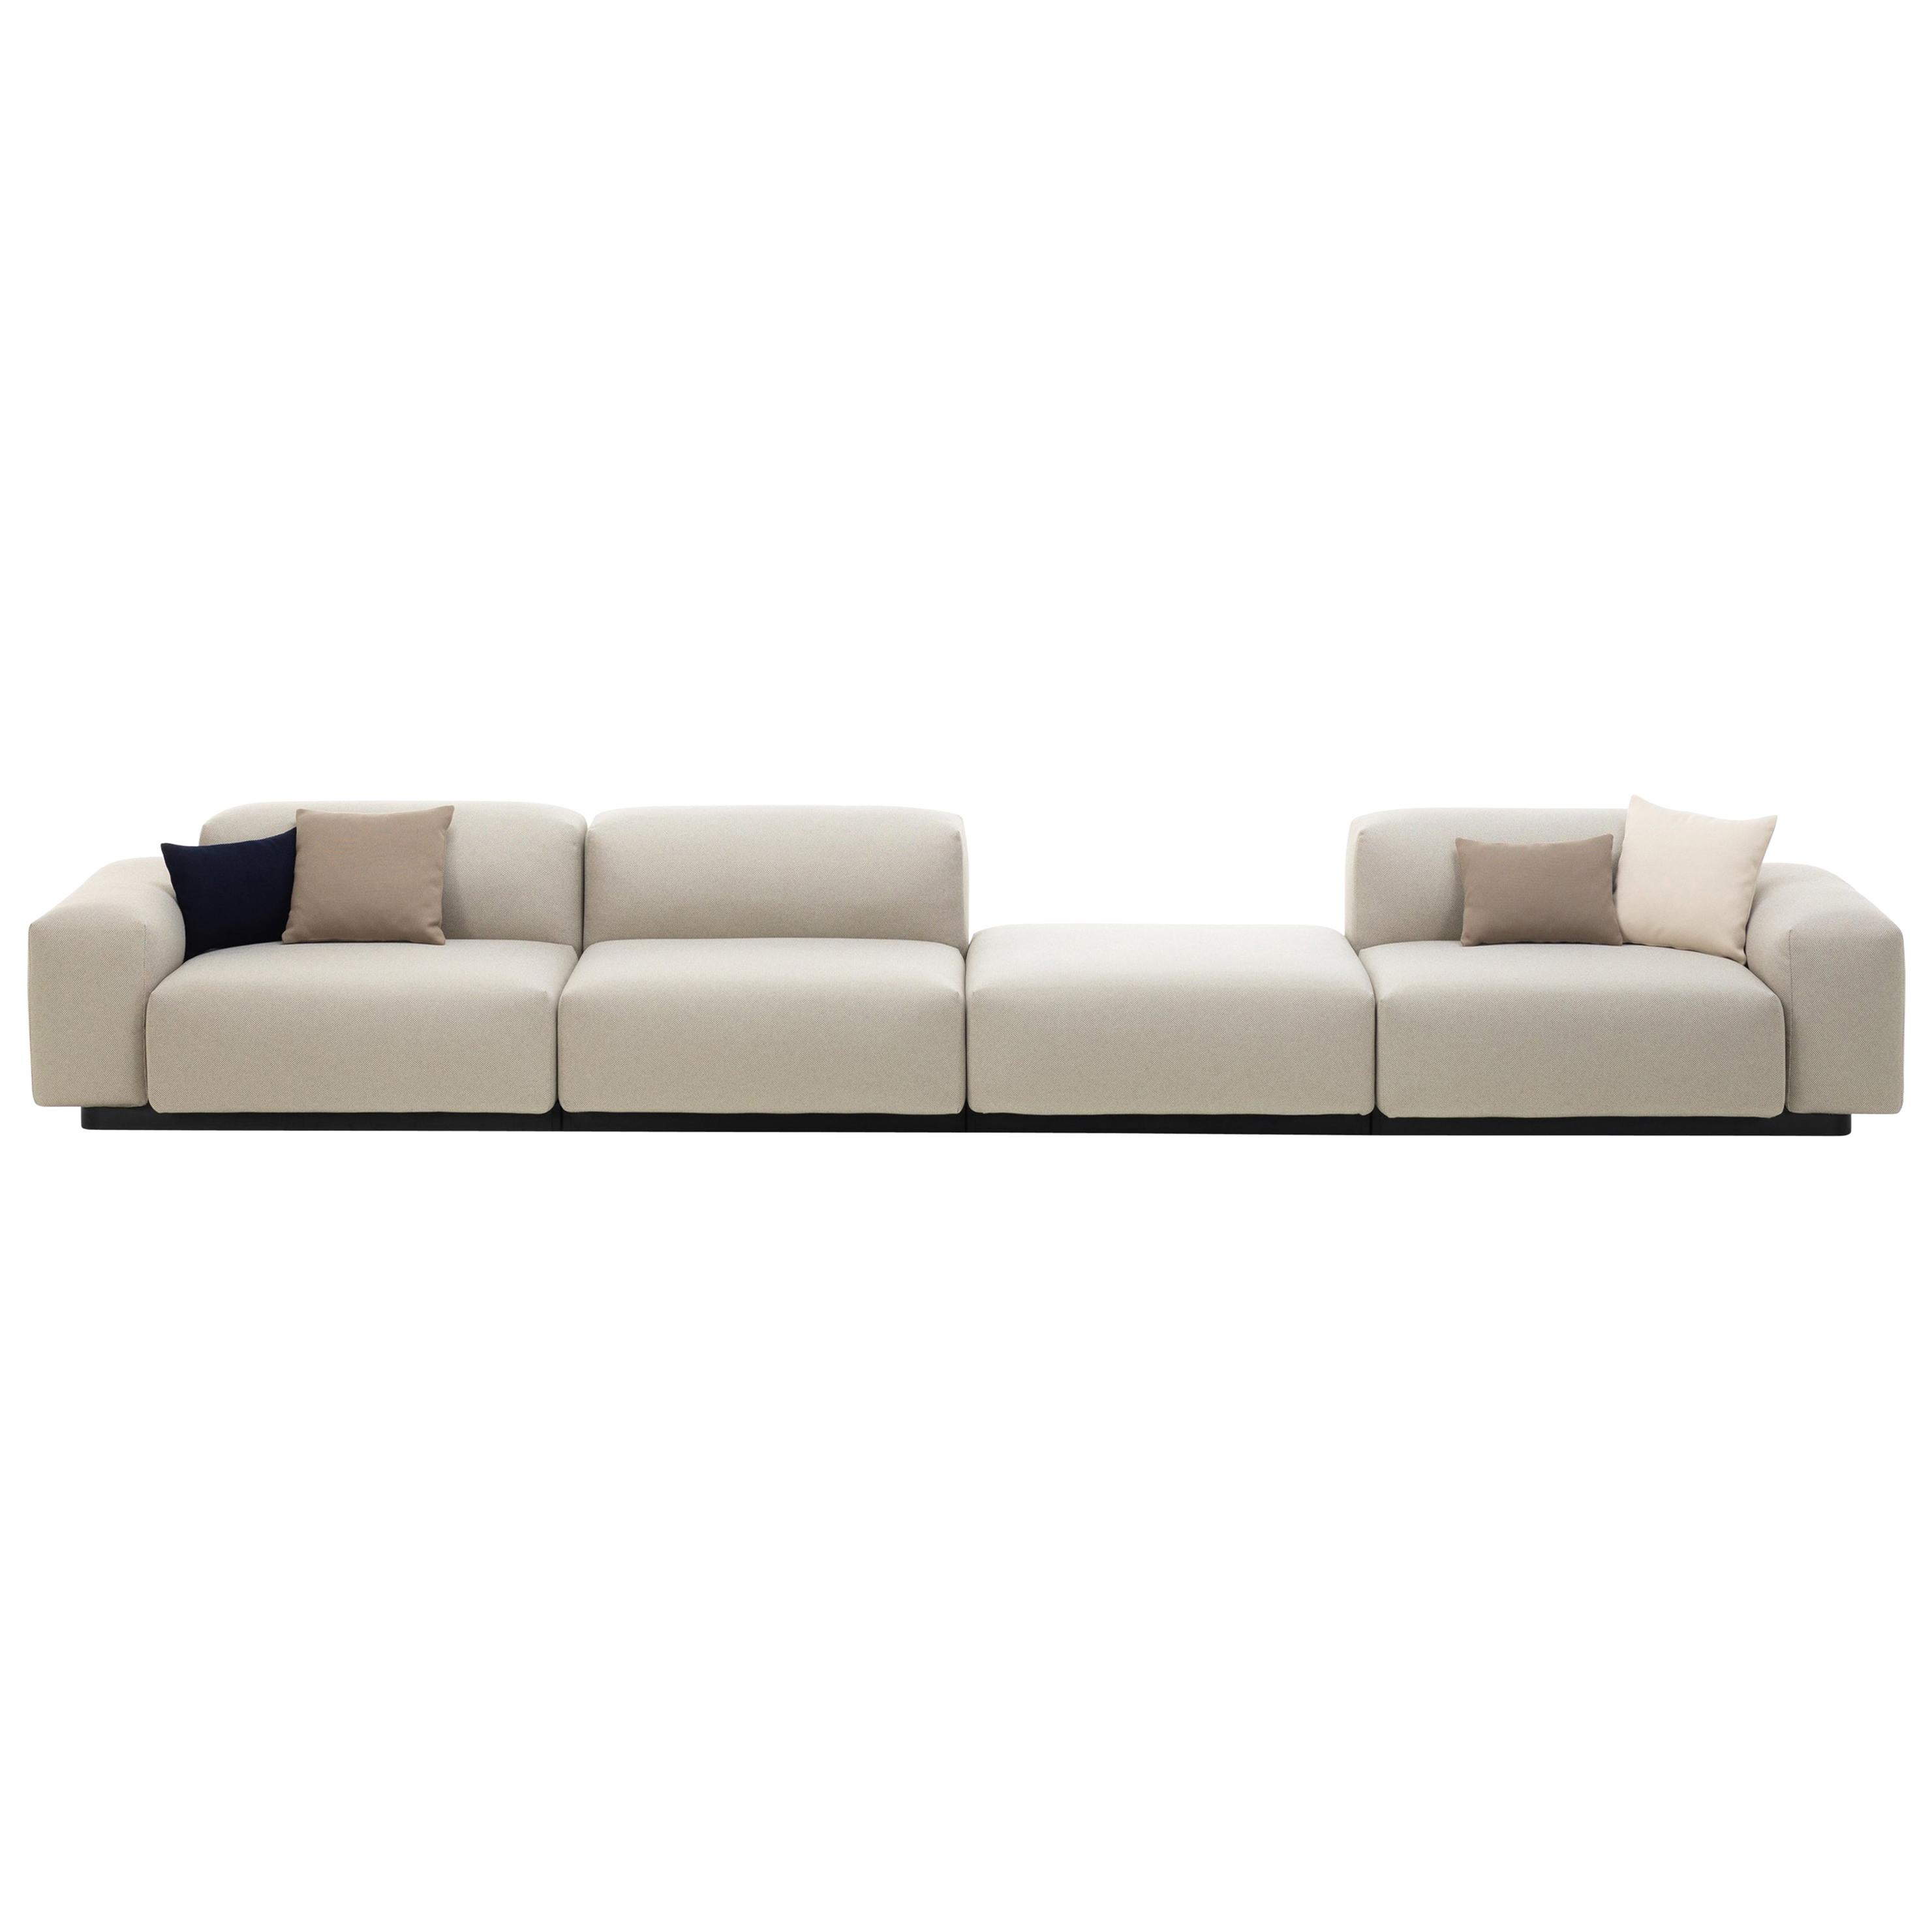 Vitra Soft Modular Four-Seat Sofa with Platform Middle in Pearl Olimpo im Angebot